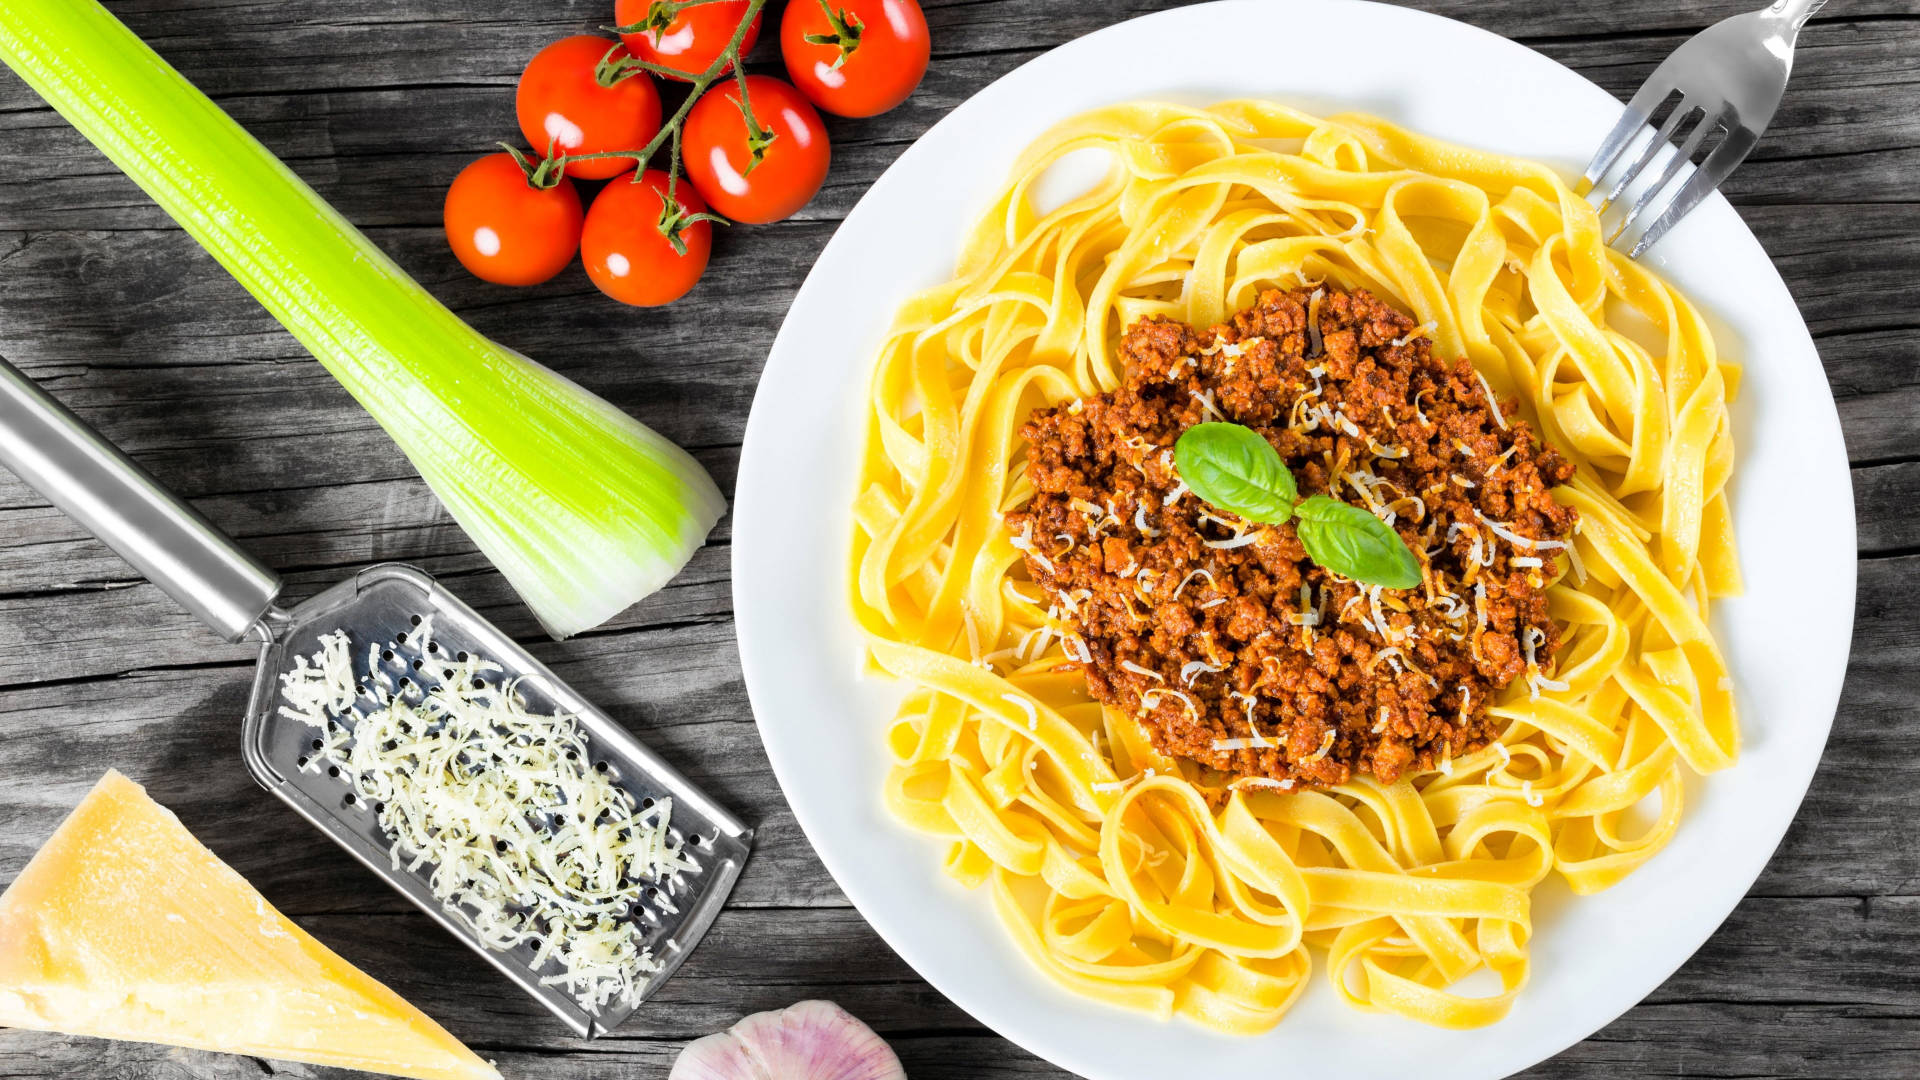 Hearty Pasta With Bolognese Sauce